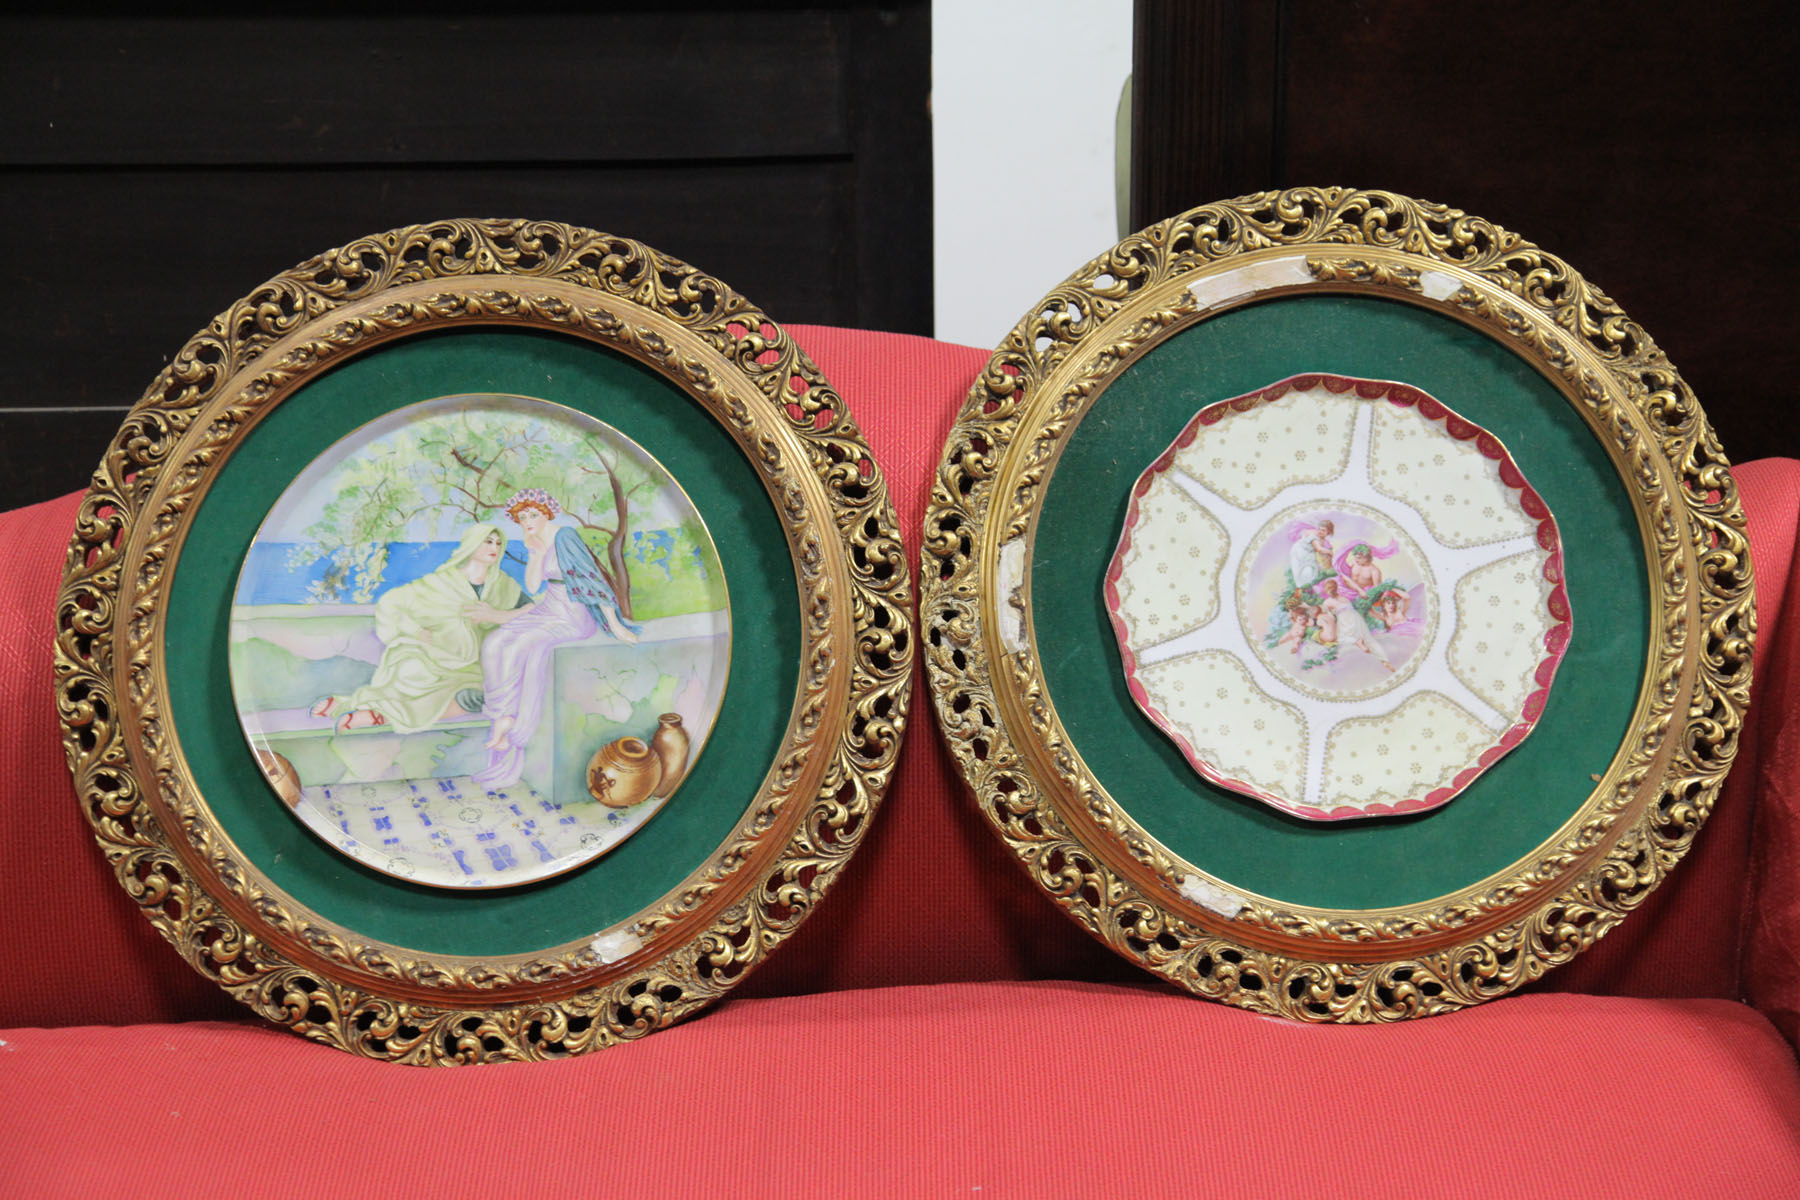 TWO PORCELAIN CHARGERS IN GILT 10c26b